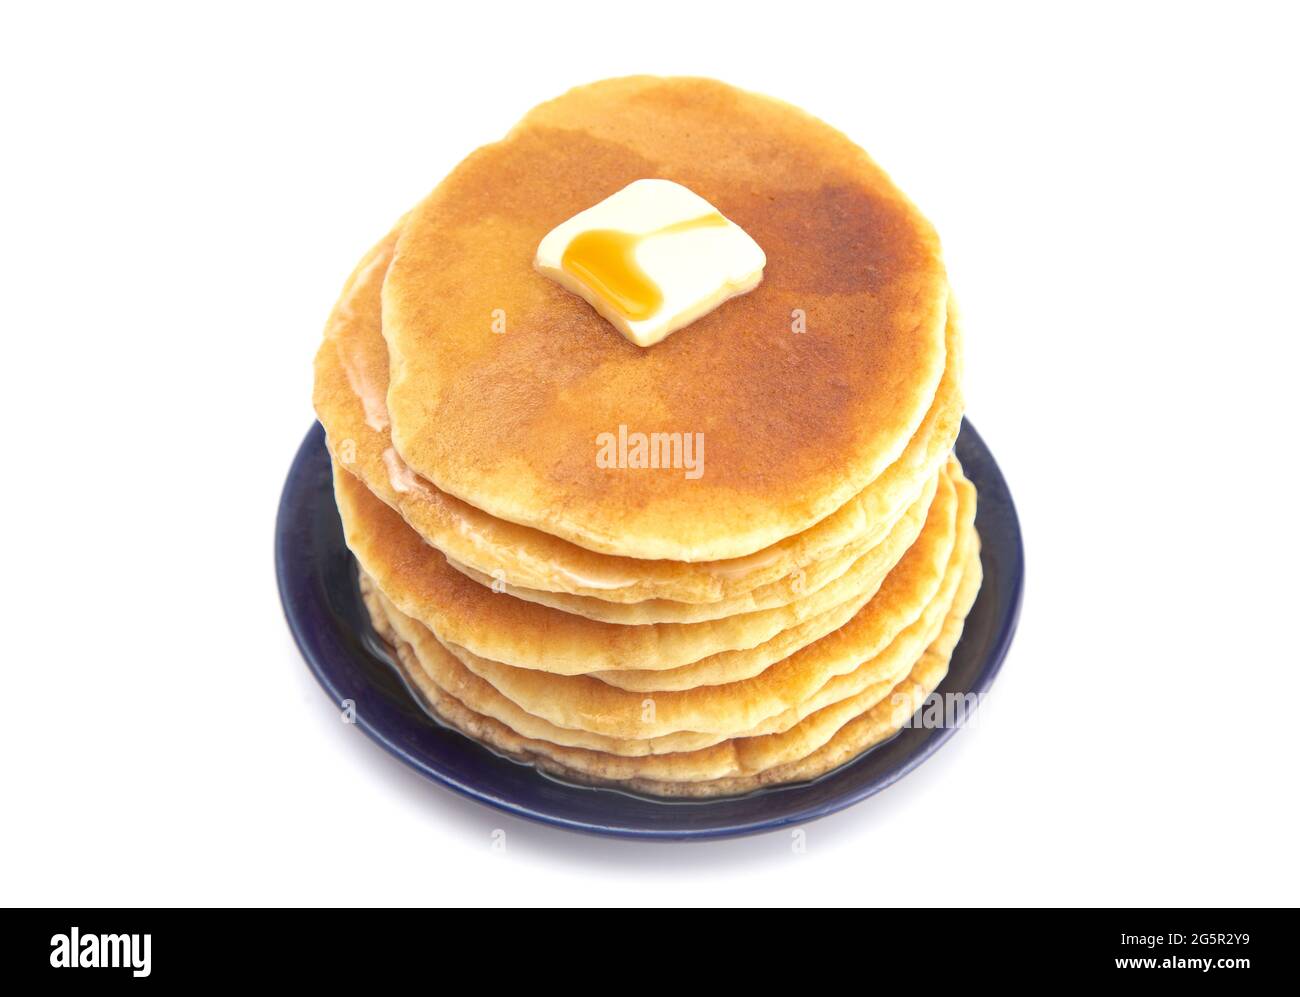 Style pancakes Cut Out Stock Images & Pictures - Alamy